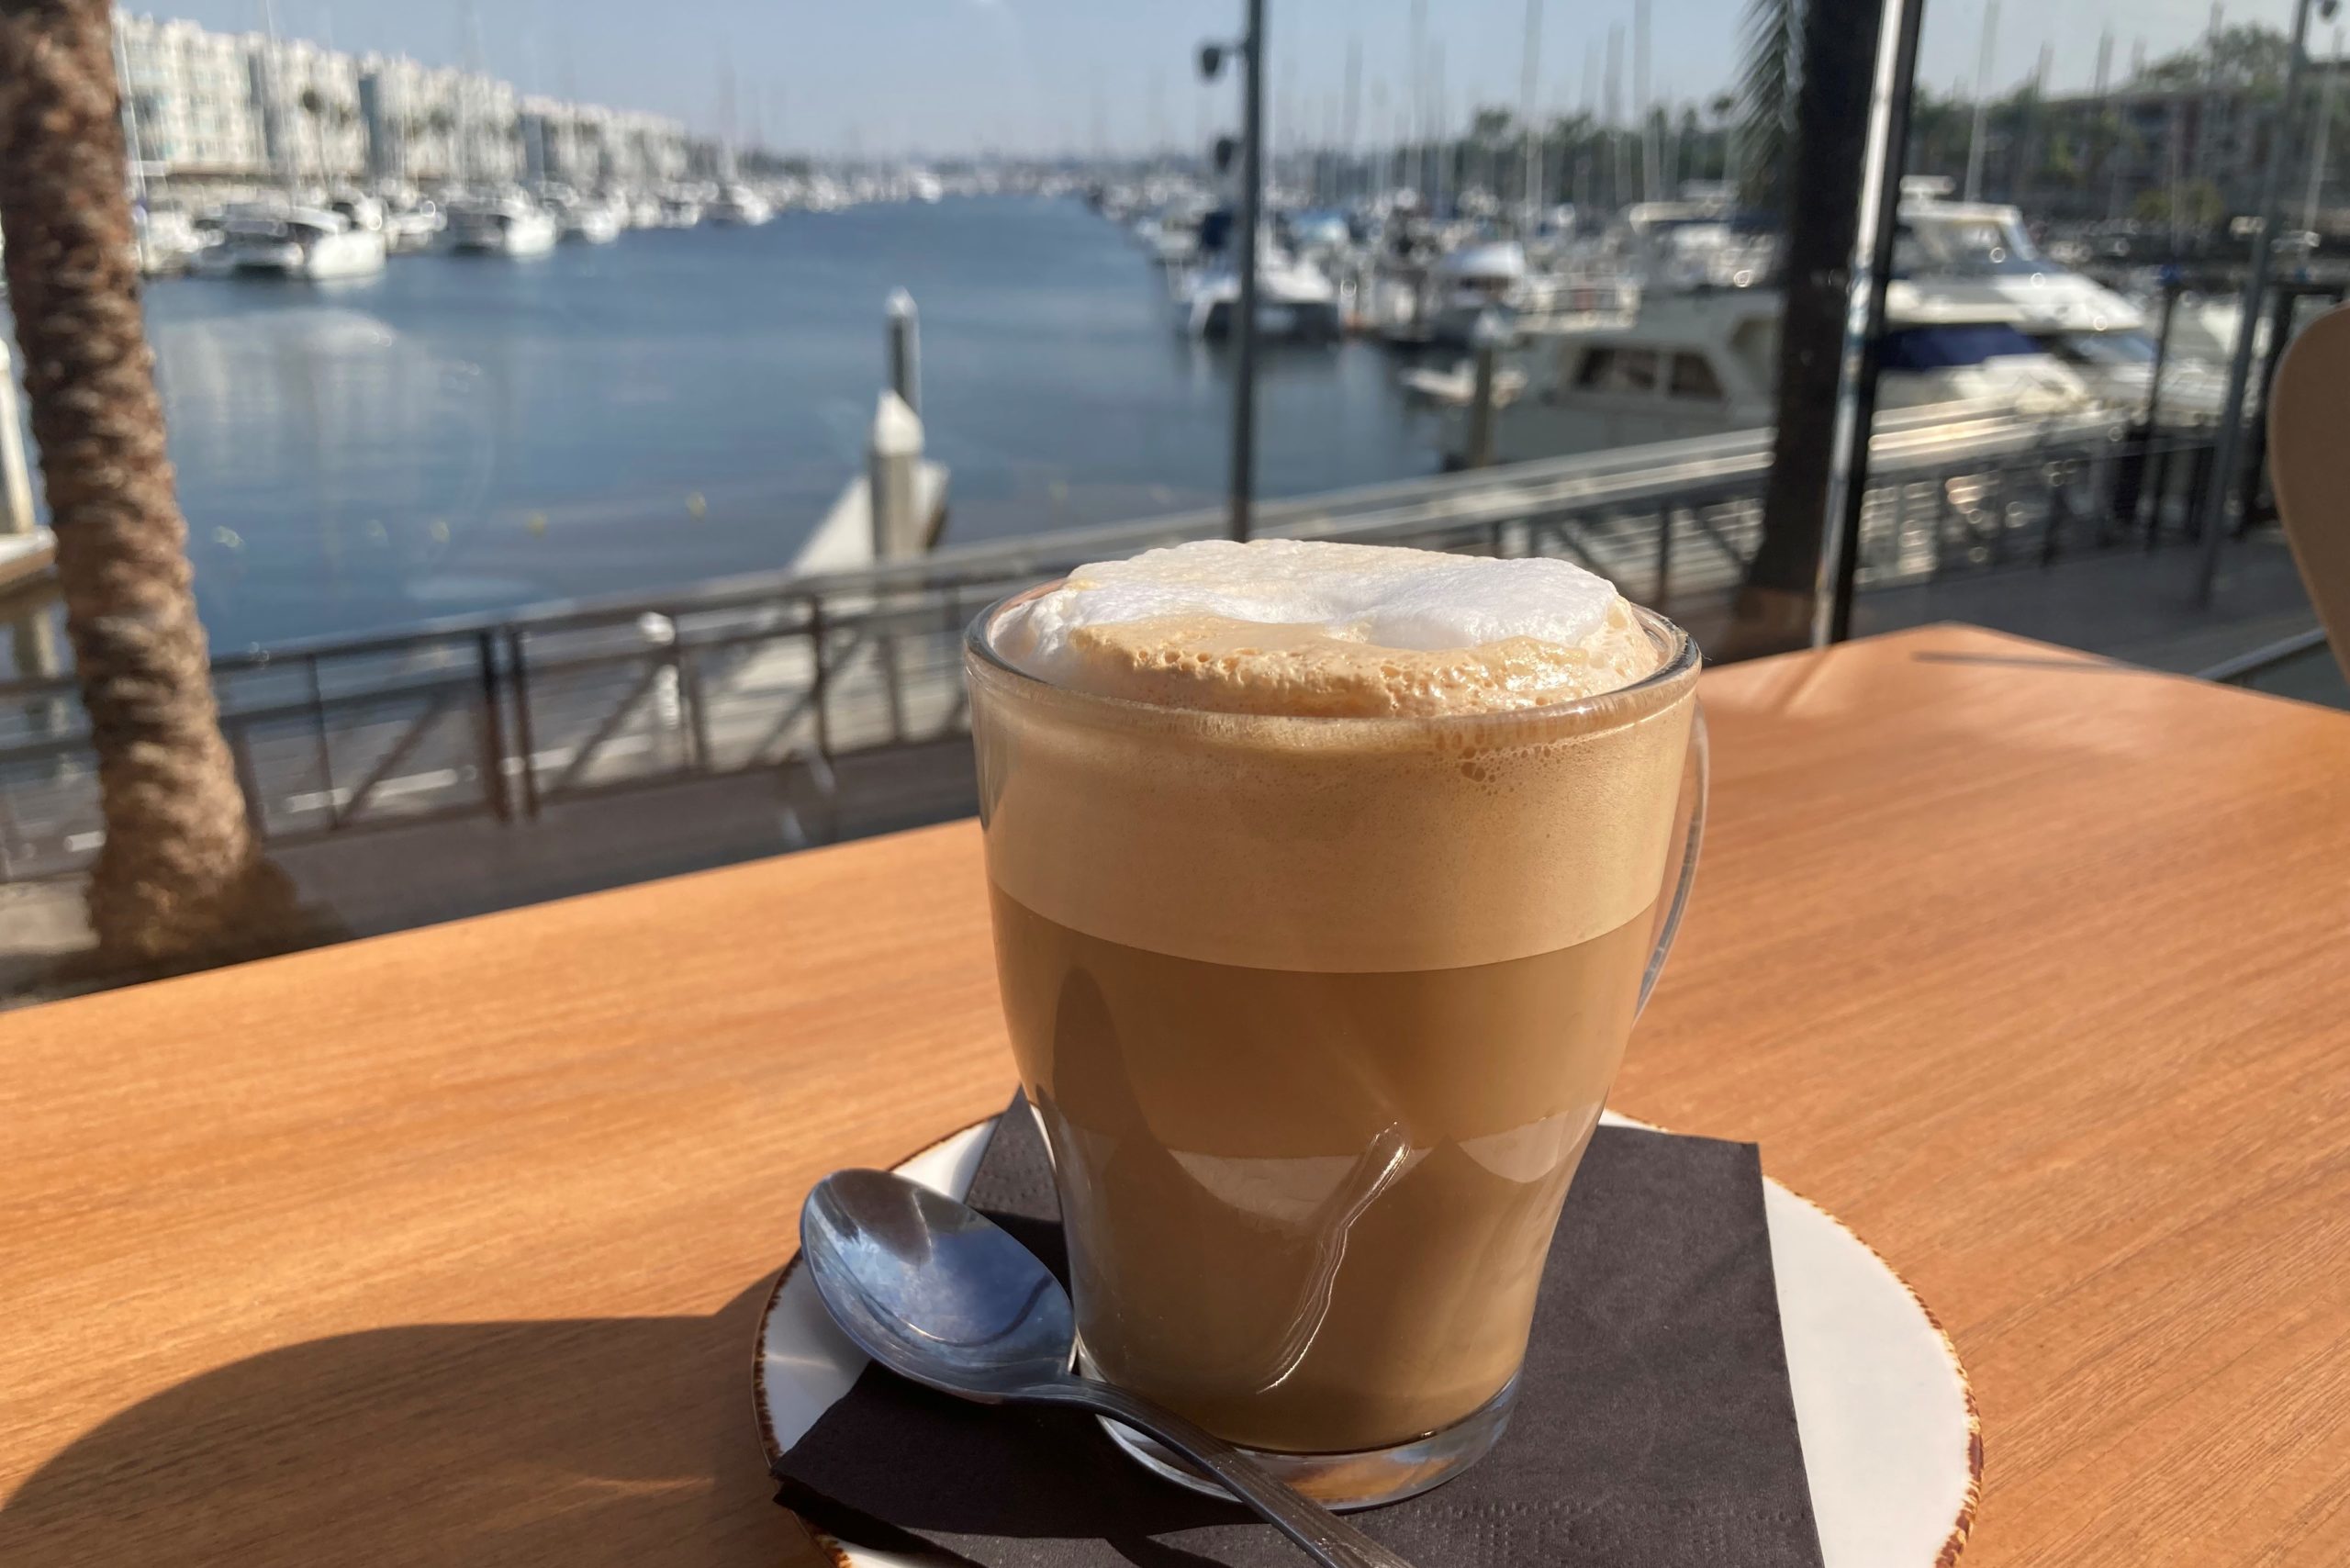 Enjoy coffee with a view from local coffee shops in Marina del Rey